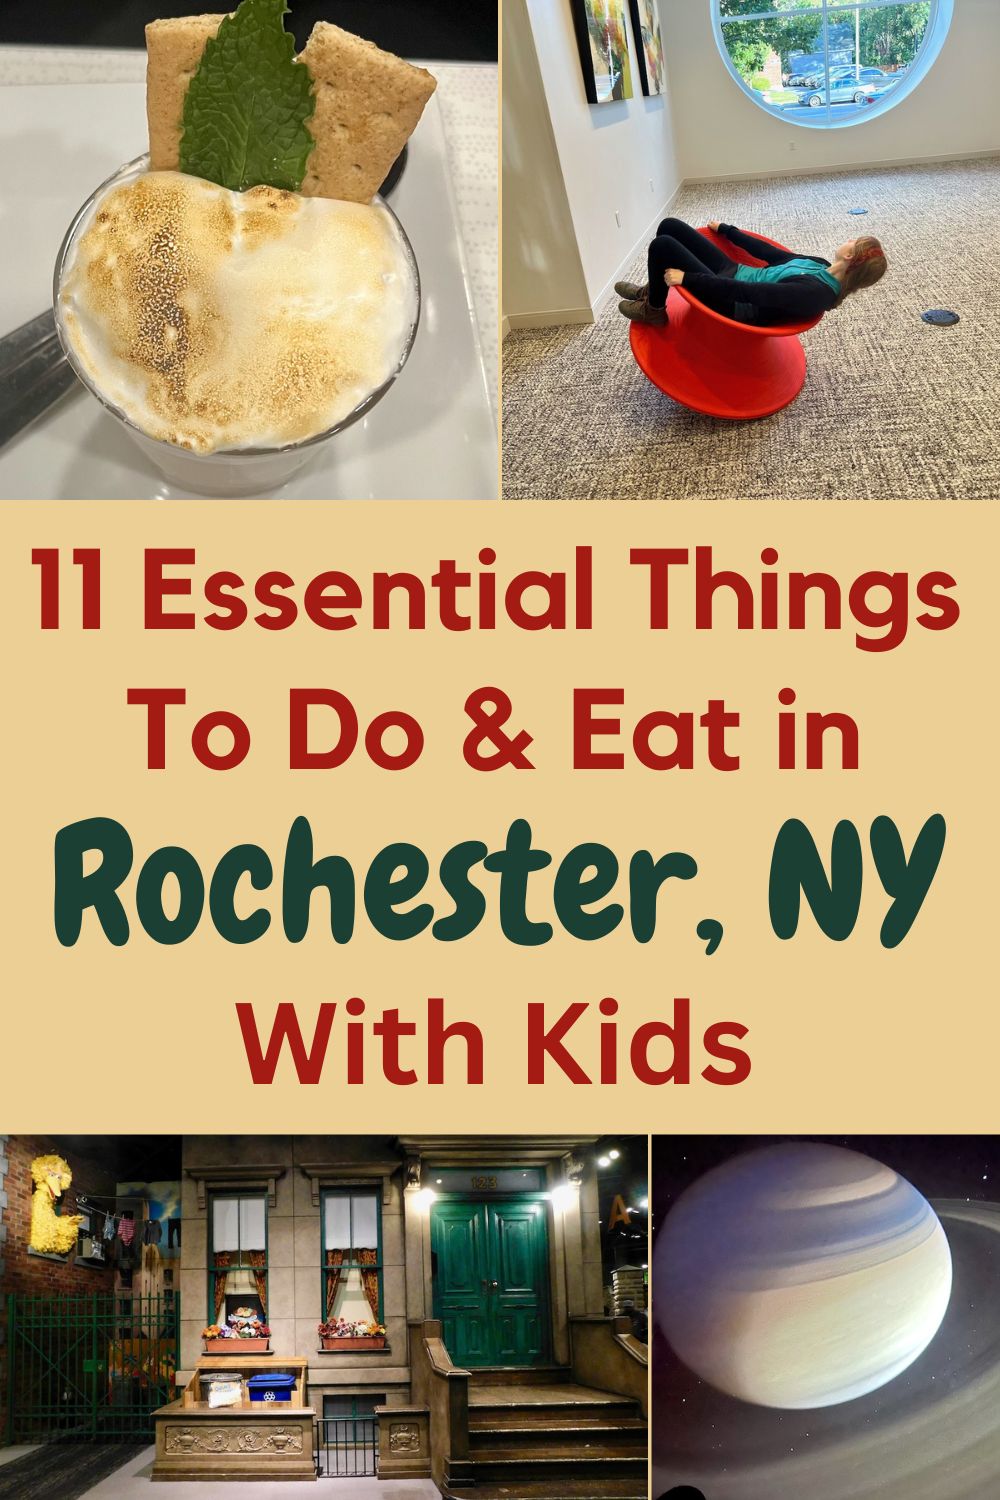 rochester, ny punches above its weight in terms of hotels, restaurants and things to do with kids. here's a plan for your weekend getaway.